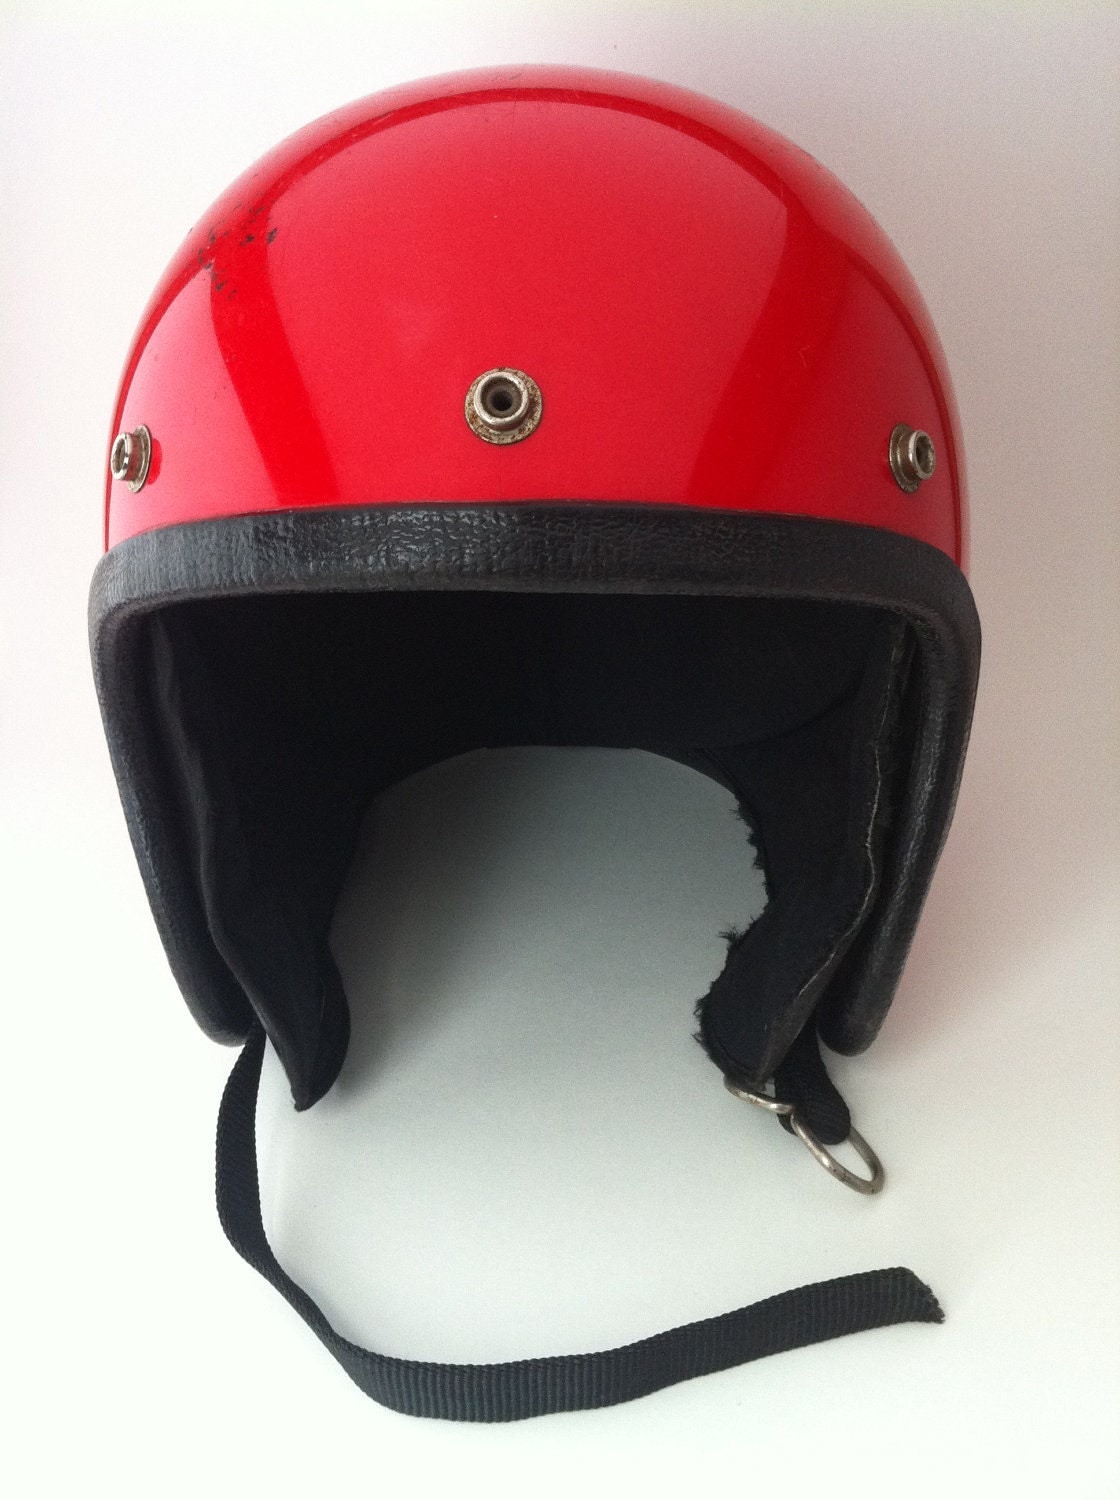 Red Vintage Motorcycle Helmet 1970s by exquisitEXCHANGE on Etsy